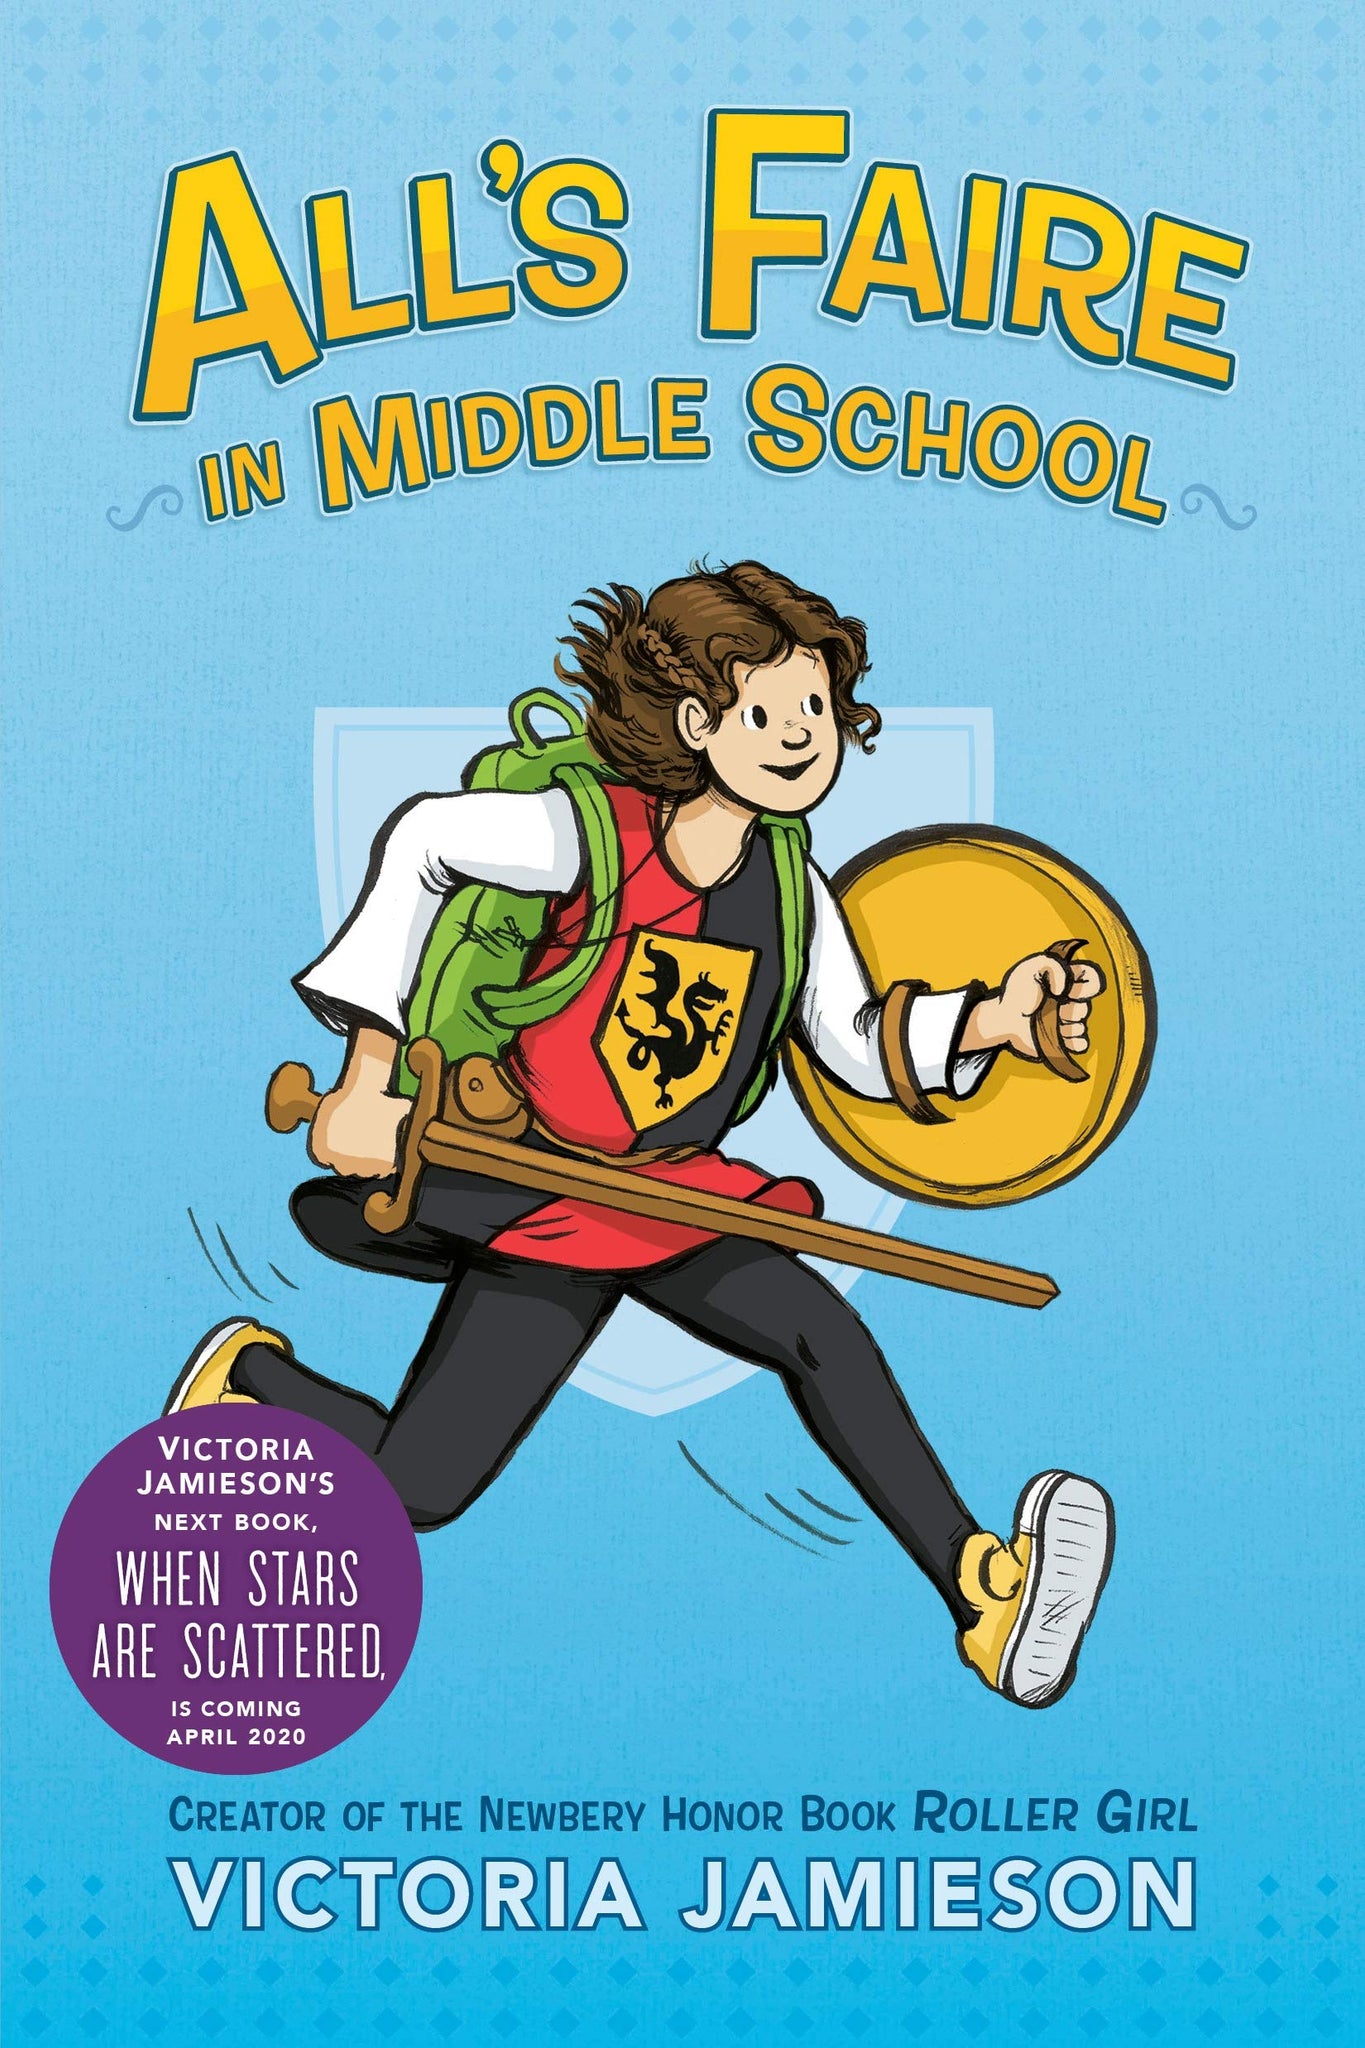 All's Faire in Middle School by Victoria Jamieson